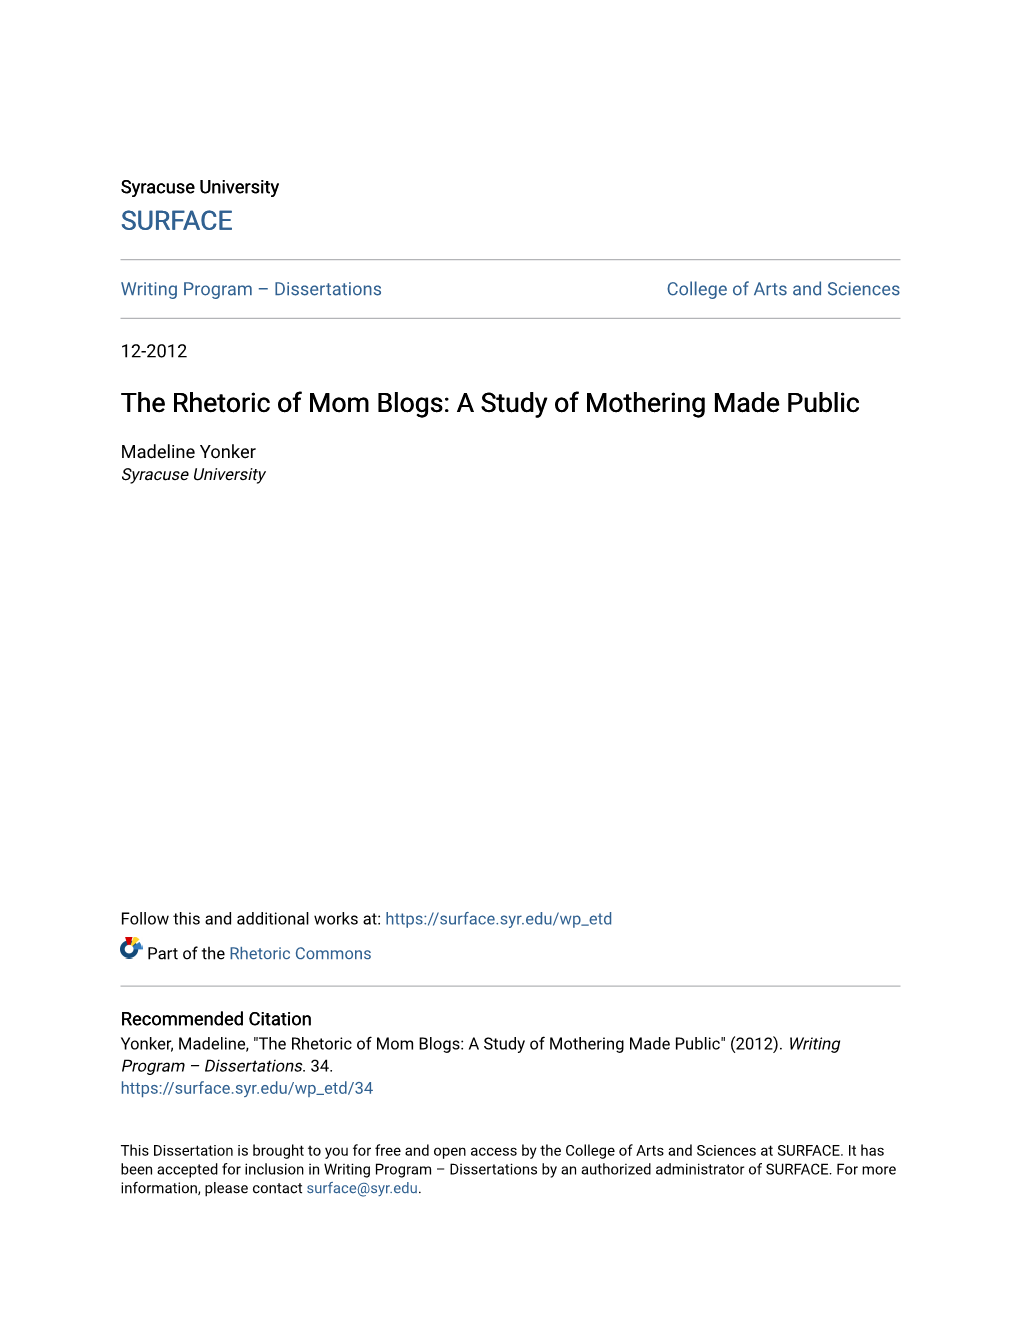 The Rhetoric of Mom Blogs: a Study of Mothering Made Public